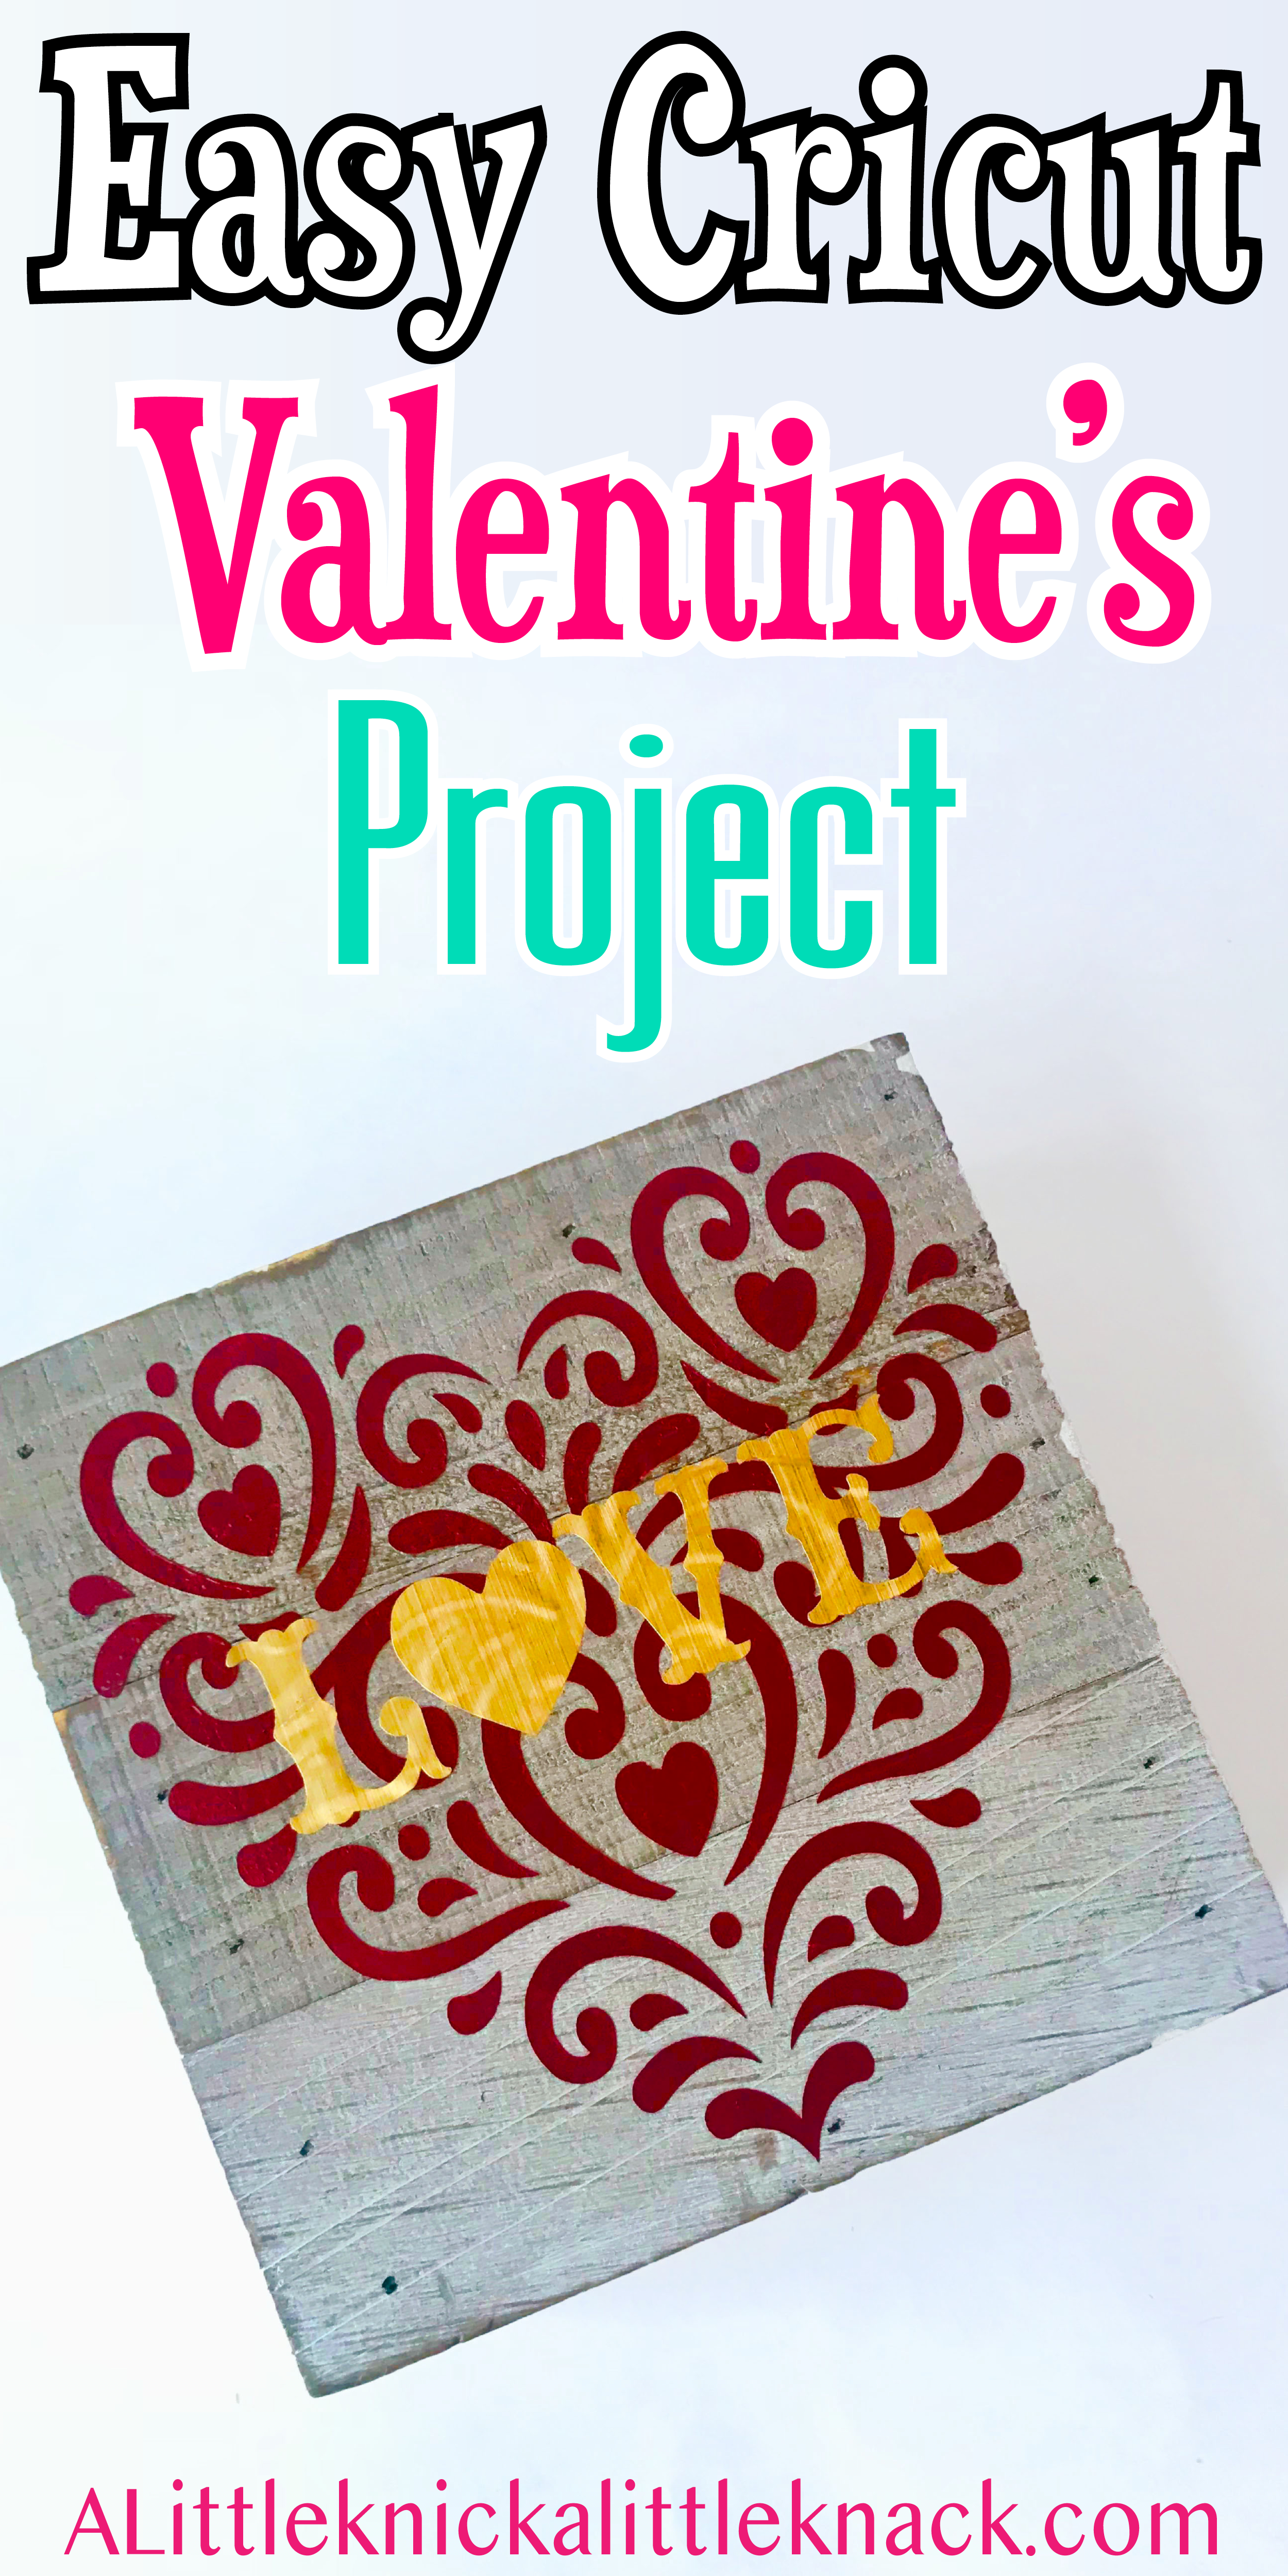 How to use vinyl stencils on unfinished wood and other useful Cricut tips in a fun easy Valentine’s tutorial #valentinesday